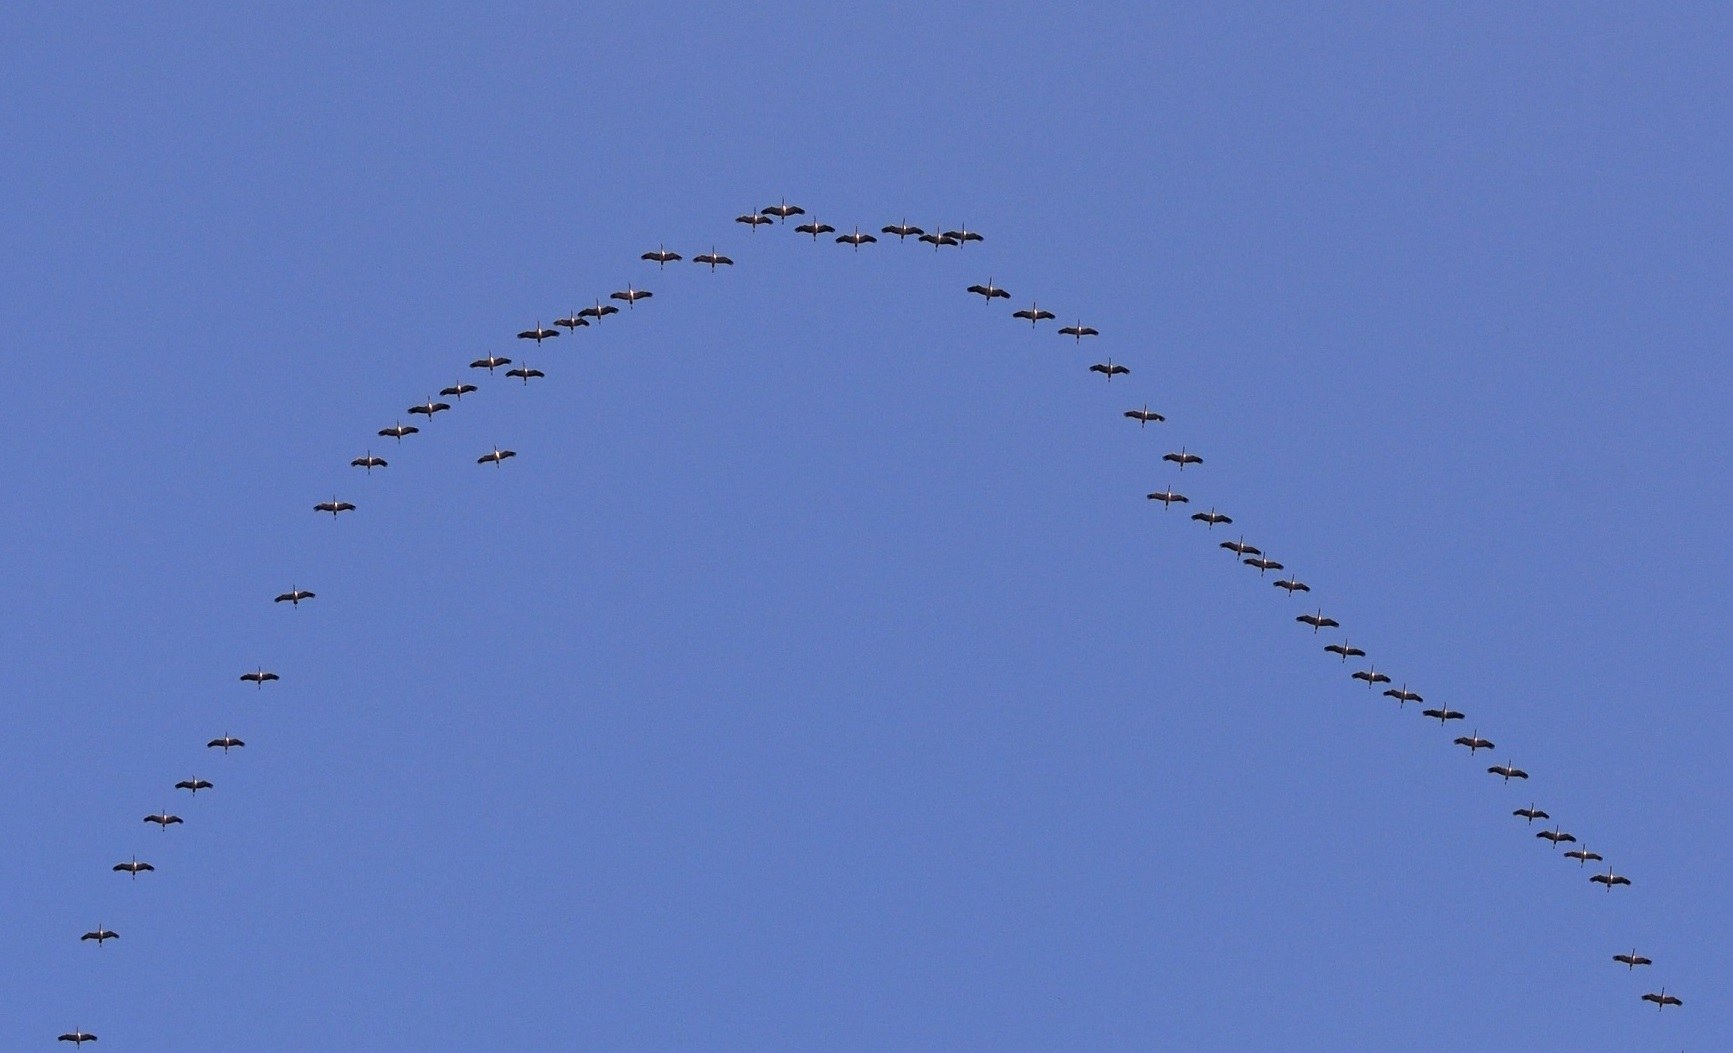 Migratory birds are adept at conserving their energy resources in flight by arranging themselves in V-shaped formations